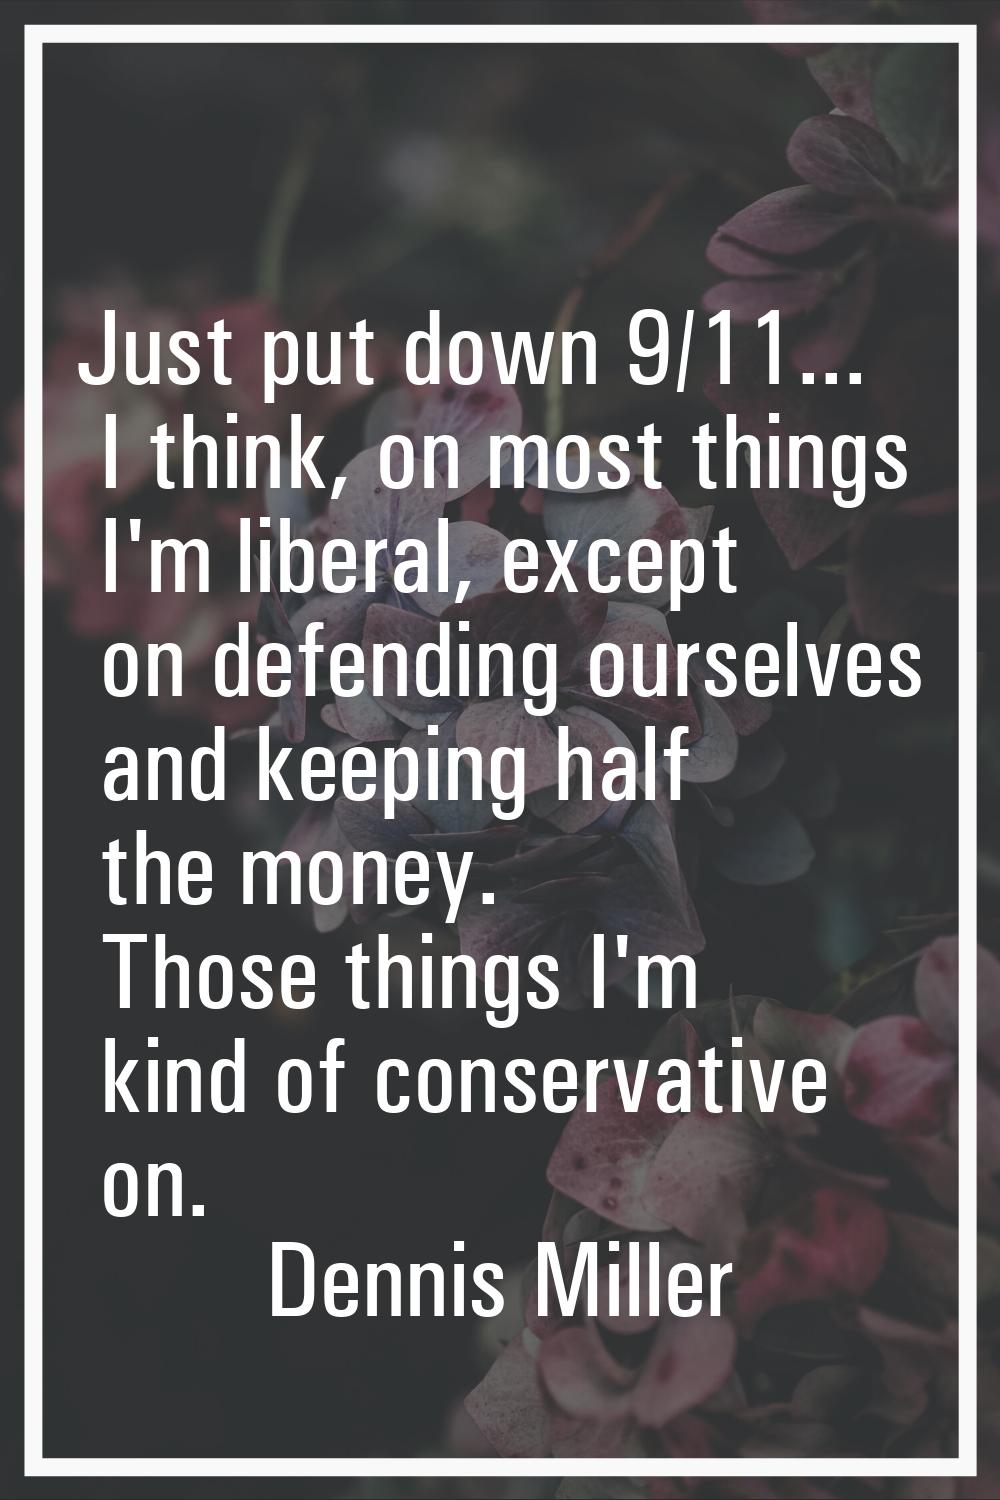 Just put down 9/11... I think, on most things I'm liberal, except on defending ourselves and keepin